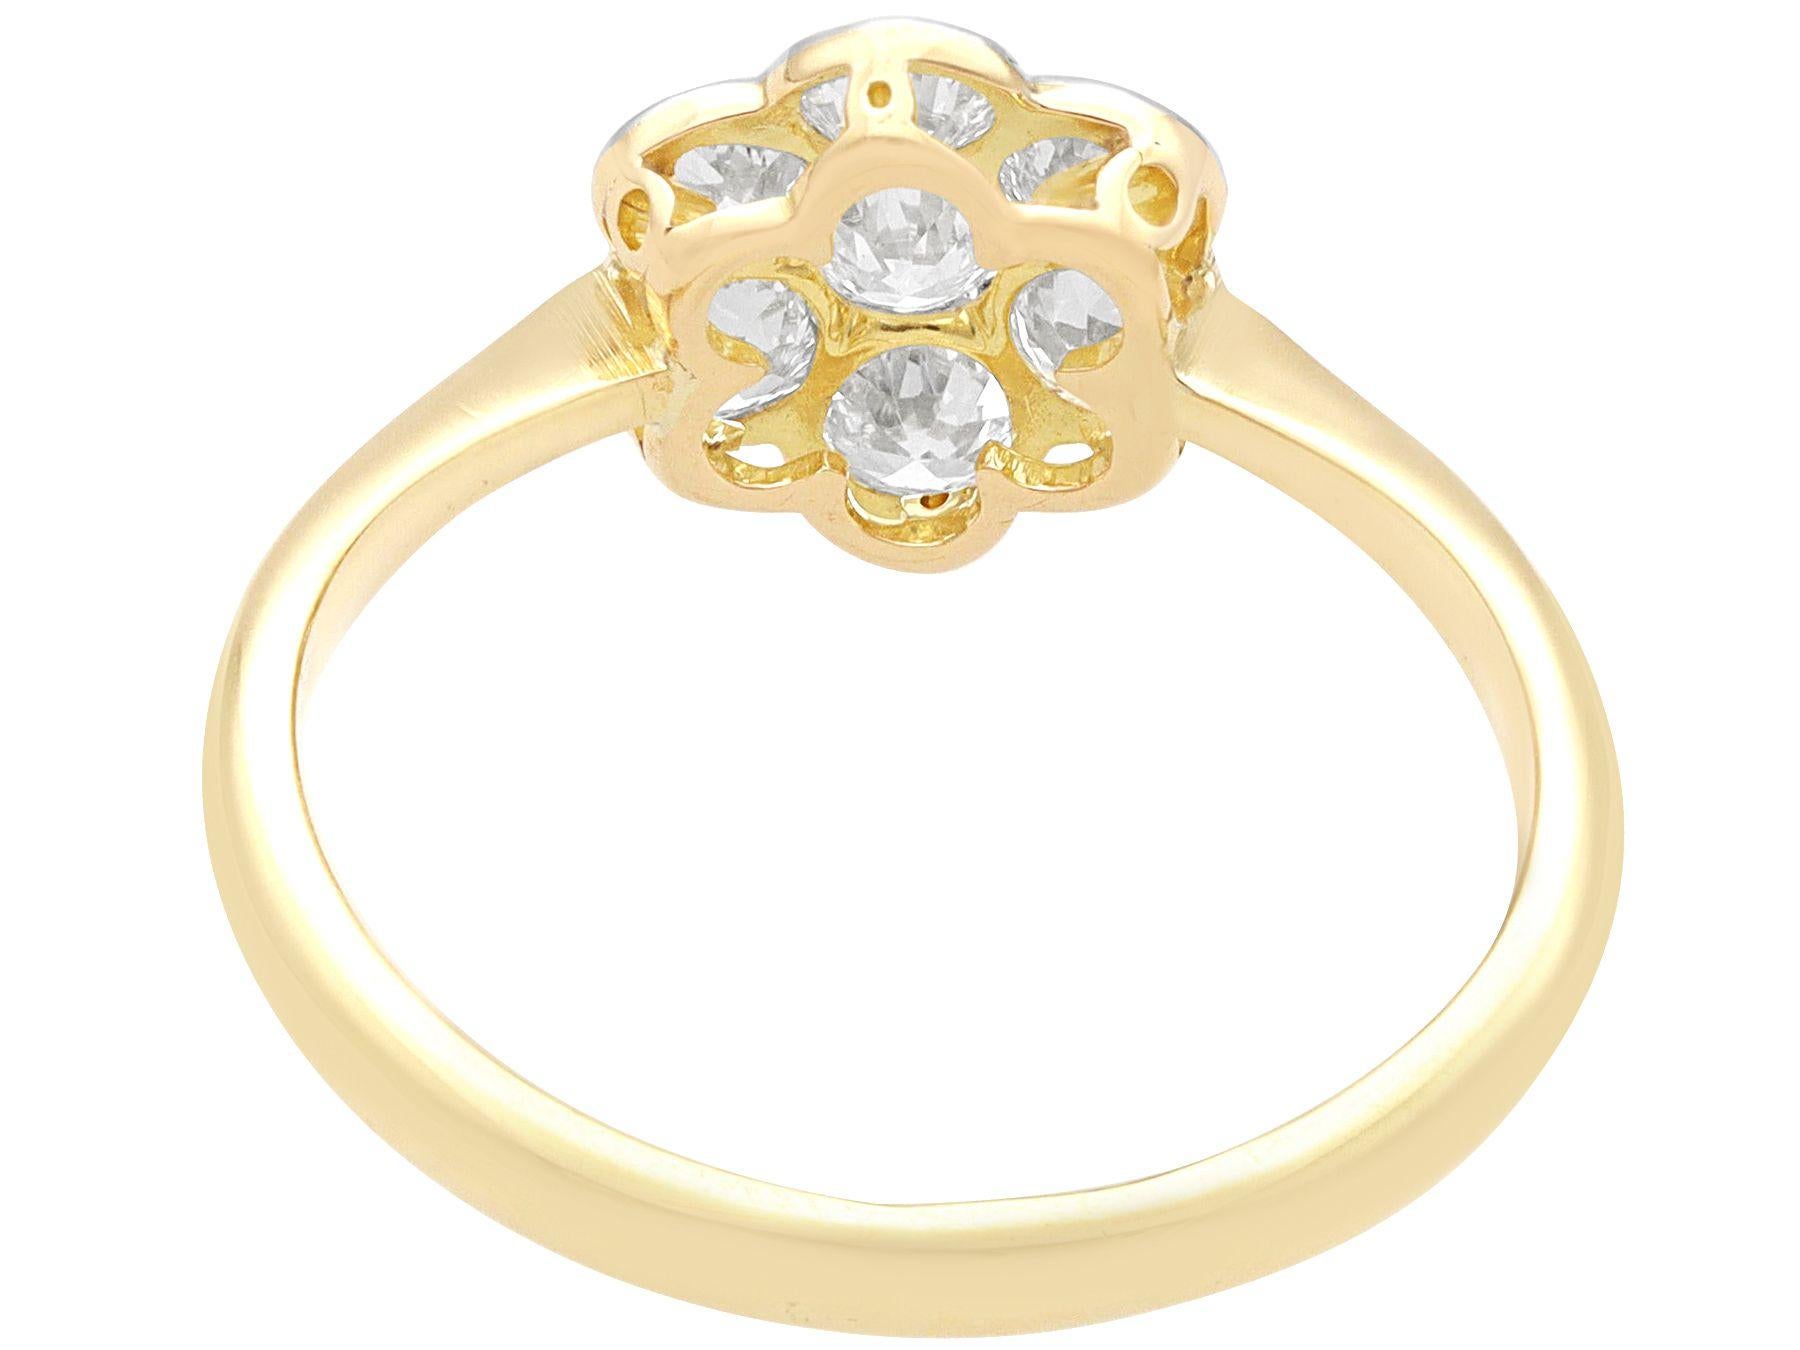 Antique 1.05 Carat Diamond and Yellow Gold Cluster Engagement Ring, circa 1930 In Excellent Condition For Sale In Jesmond, Newcastle Upon Tyne